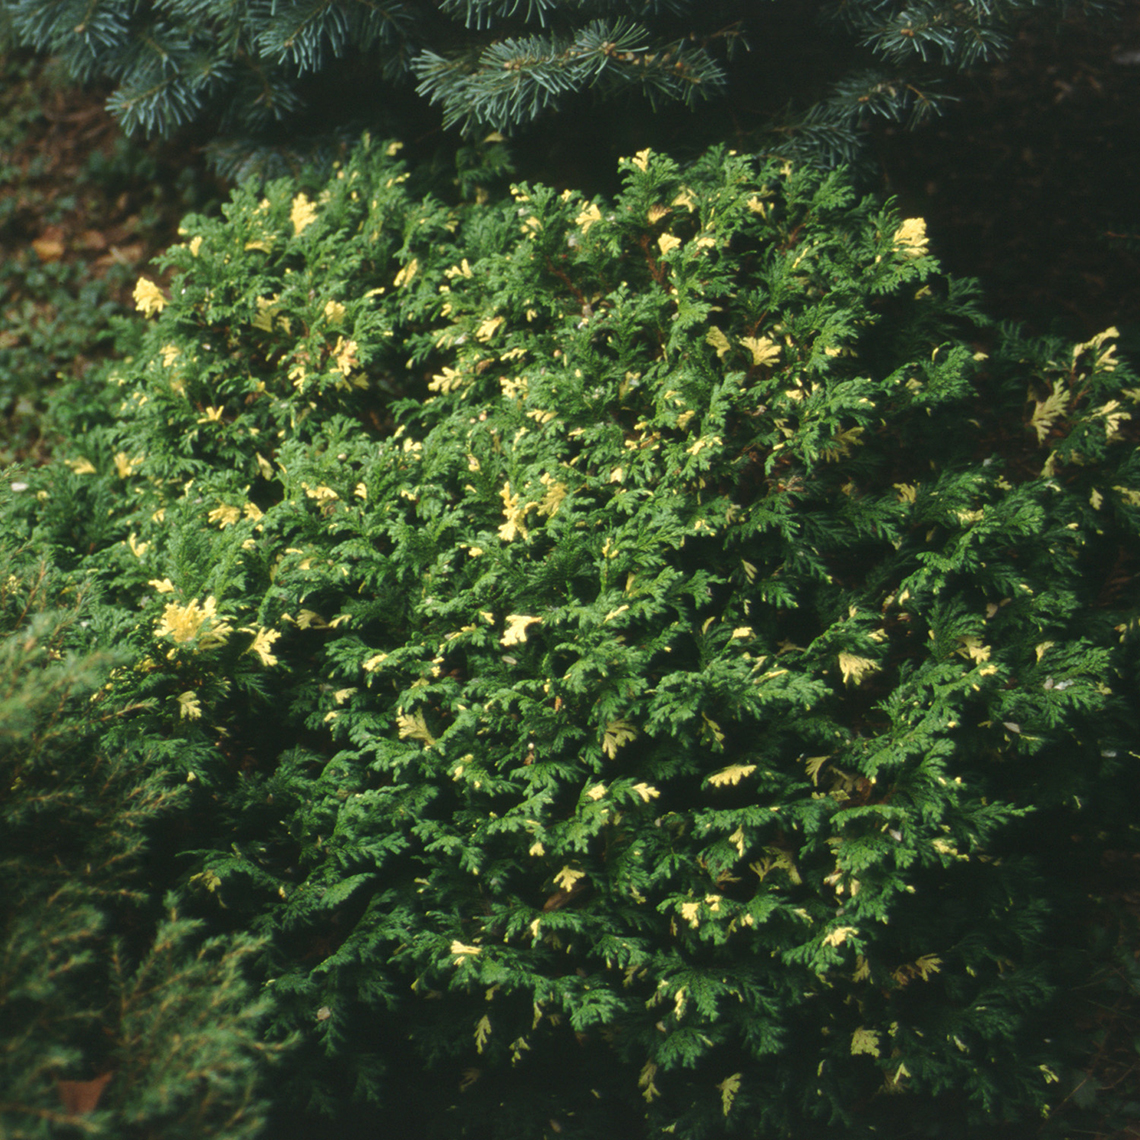 Green foliage highlighted with spots of buttercream yellow on Chamaecyparis Mini Variegated